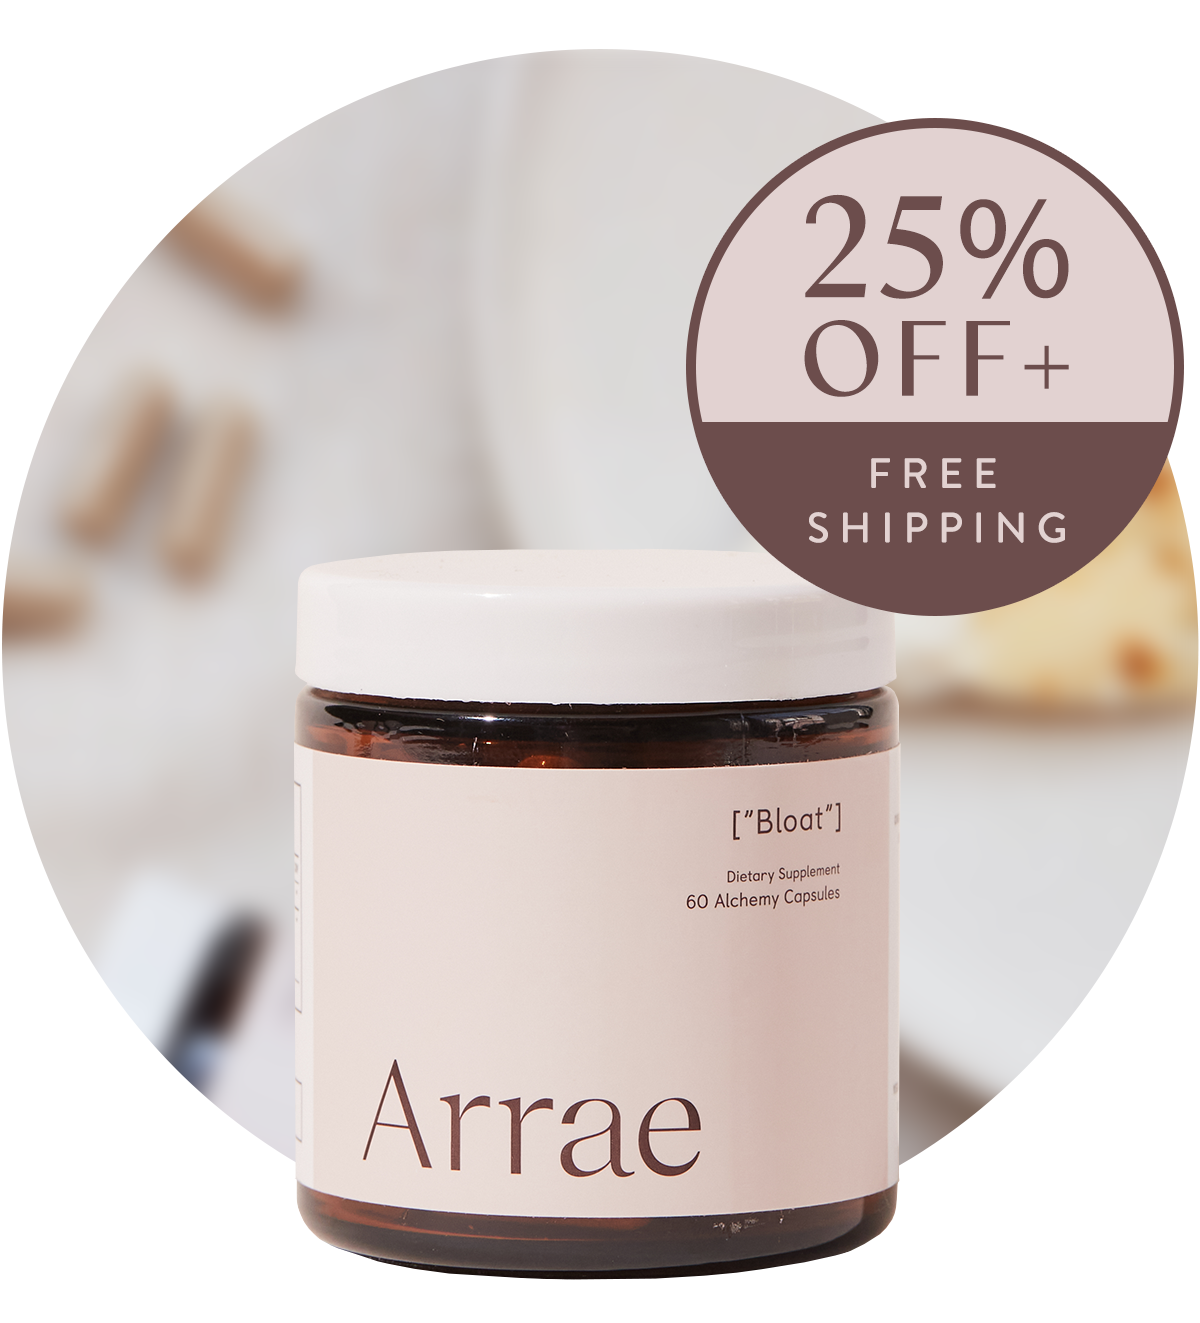 Arrae Bloat Supplement - A bottle of 60 capsules with natural ingredients, designed to support digestive health and reduce bloating.